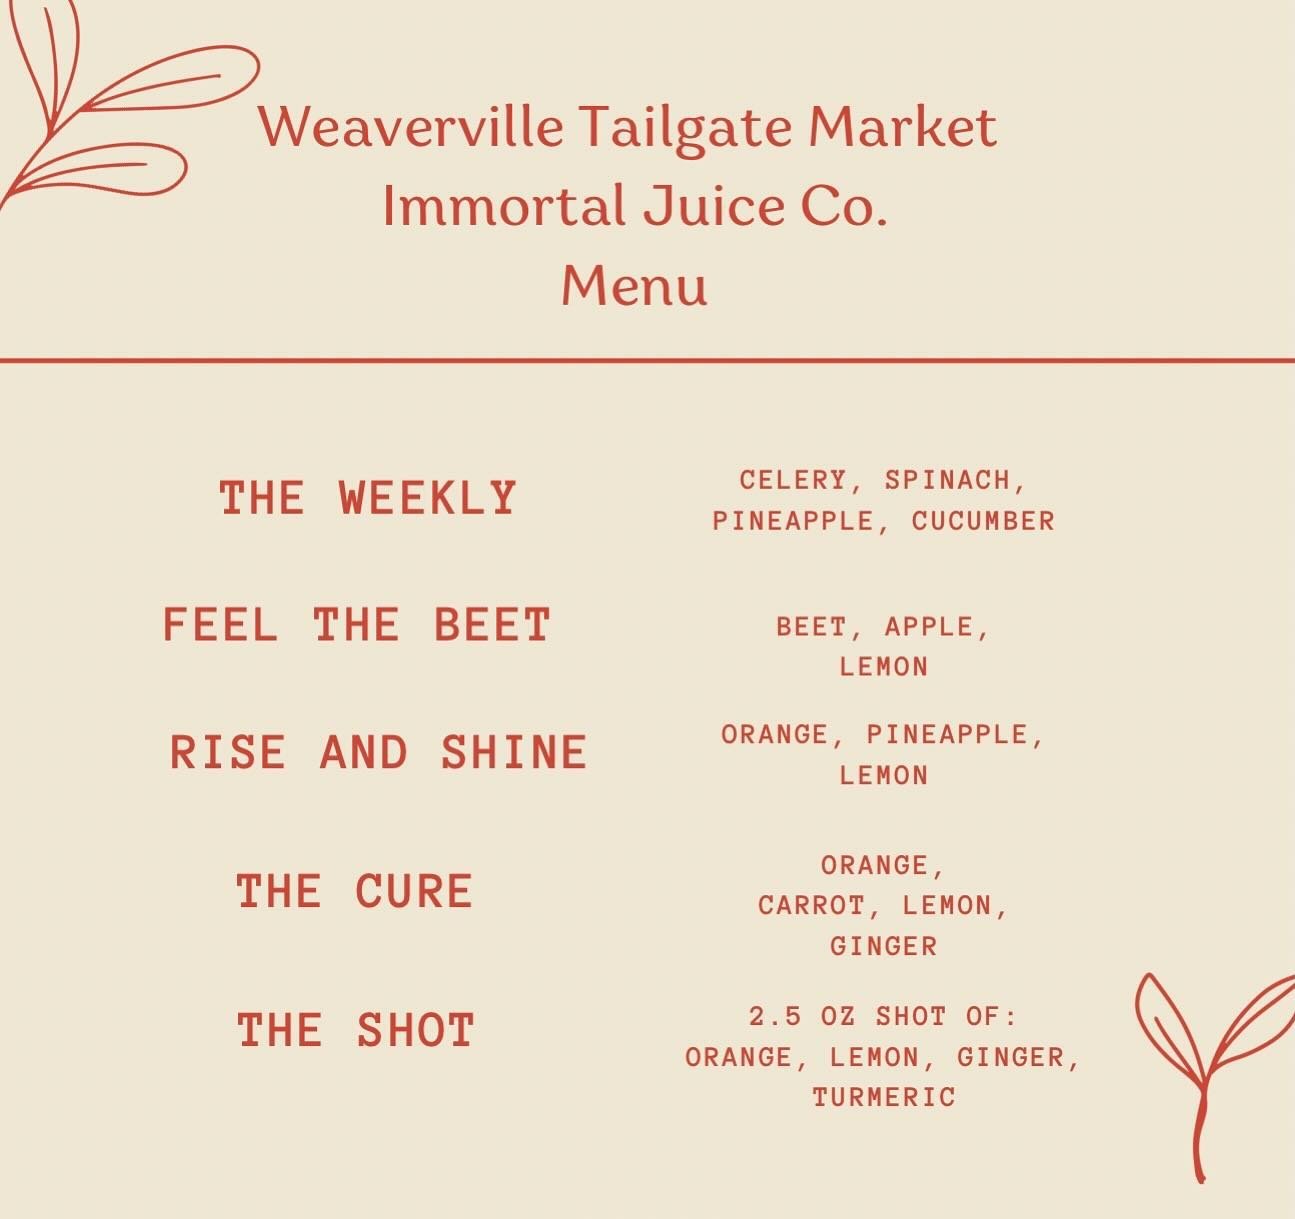 Come by tomorrow 3-6pm for our very first market  @weavervilletailgatemarket

We&rsquo;re so excited to be there and offer juice in the middle of your week ☺️